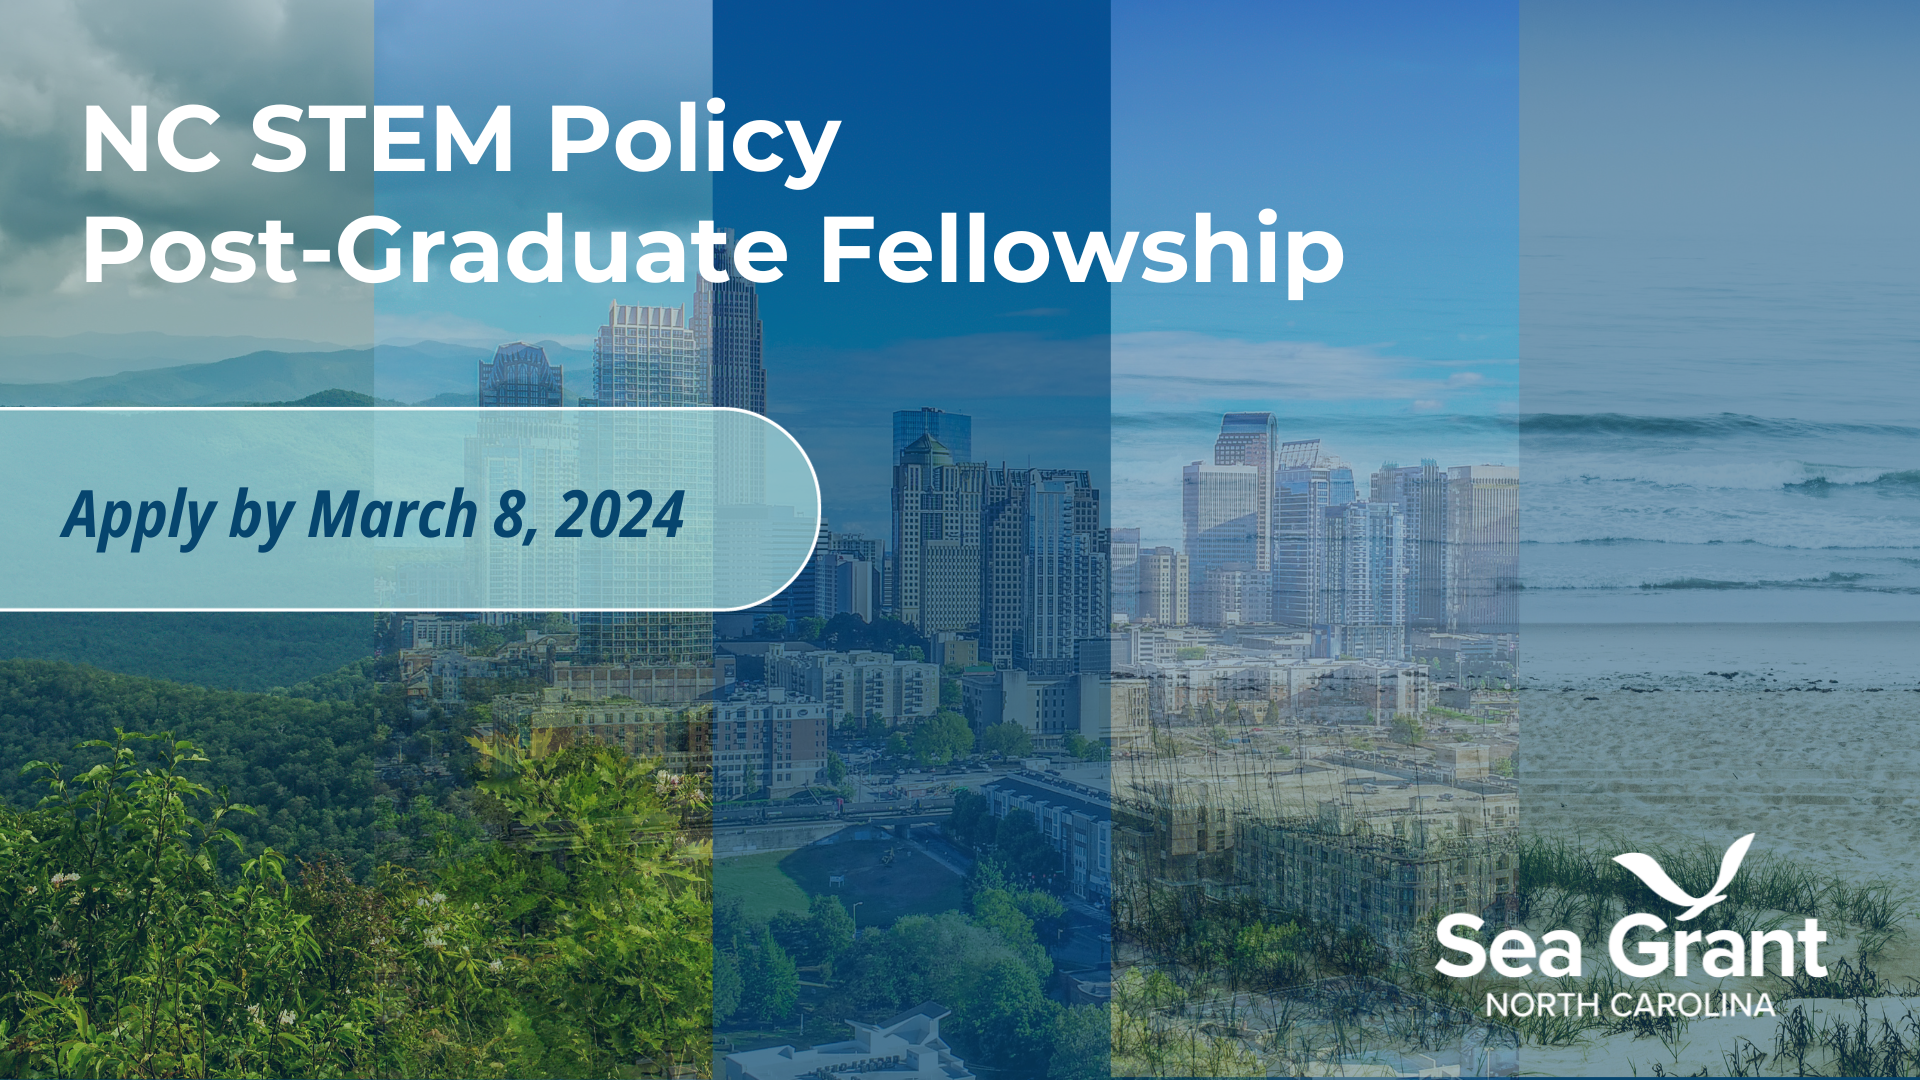 Background image shows mountain landscape, transitioning into city landscape, transitioning into beach landscape. Foreground reads, "NC STEM Policy Post Graduate Fellowship - Apply by March 8, 2024." The North Carolina Sea Grant logo is in the bottom right corner of the image.